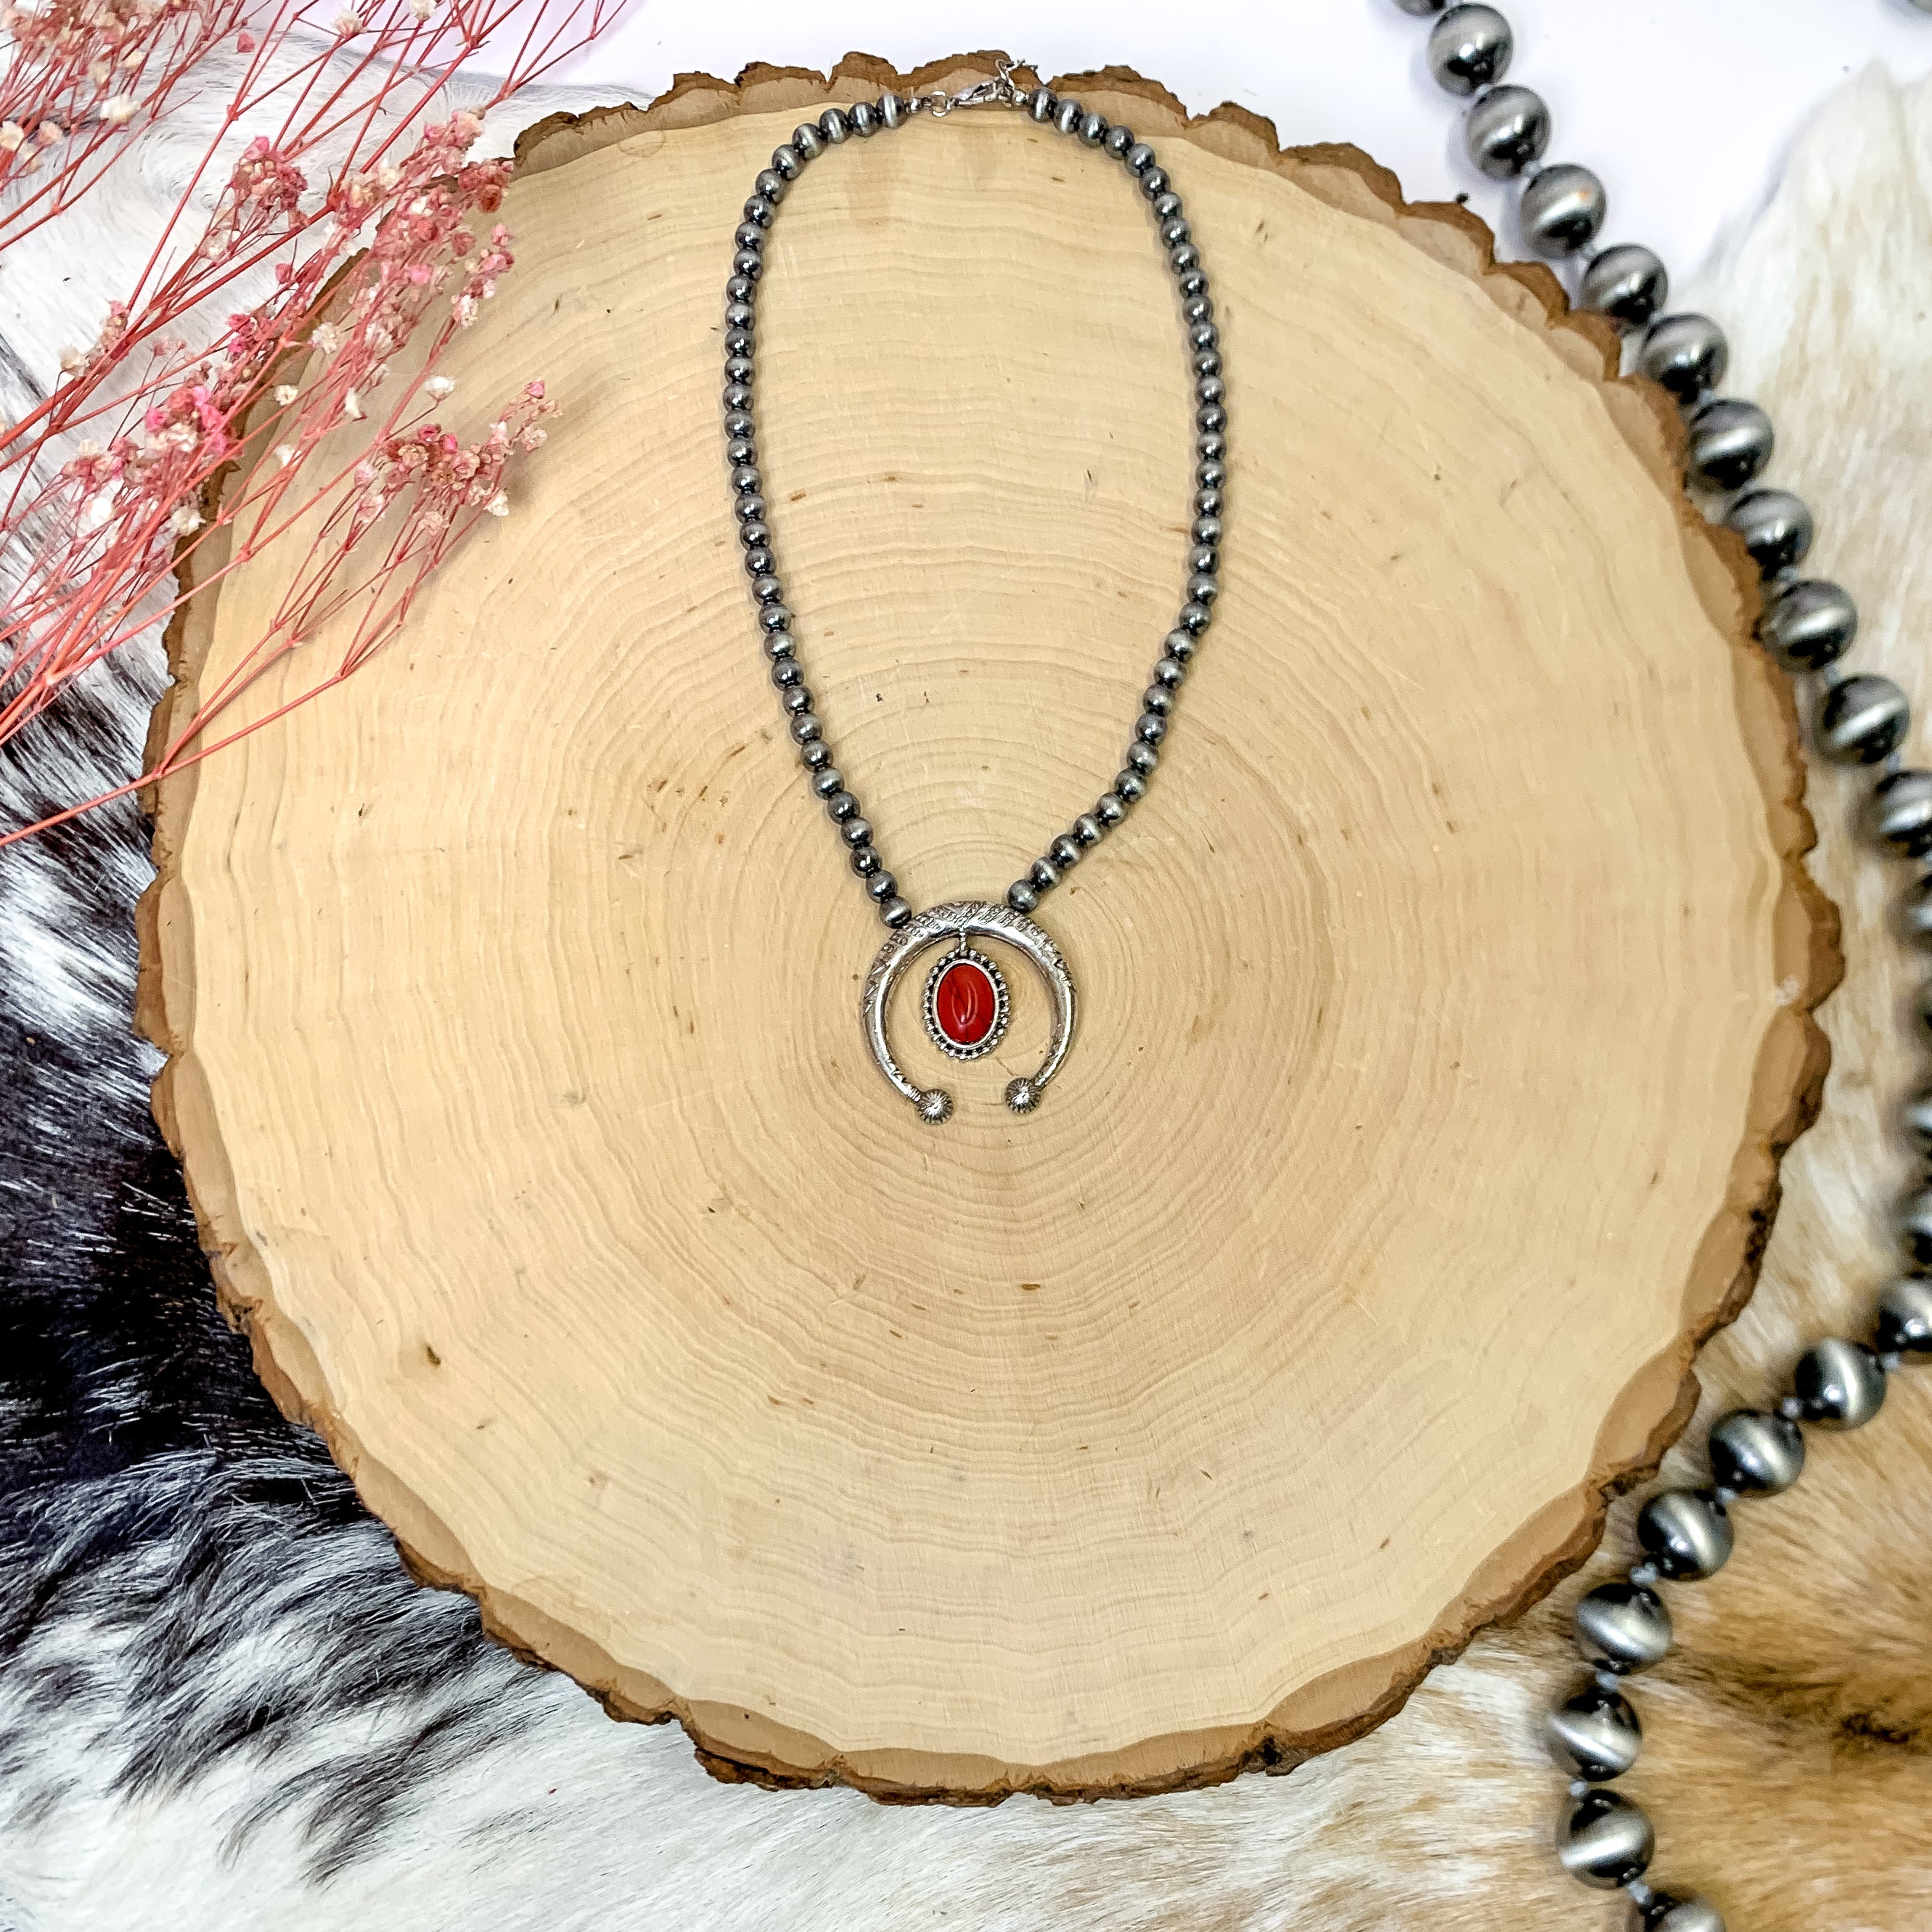 Faux Navajo Pearl Silver Tone Necklace with Naja Pendant and Oval Stone Dangle in Red